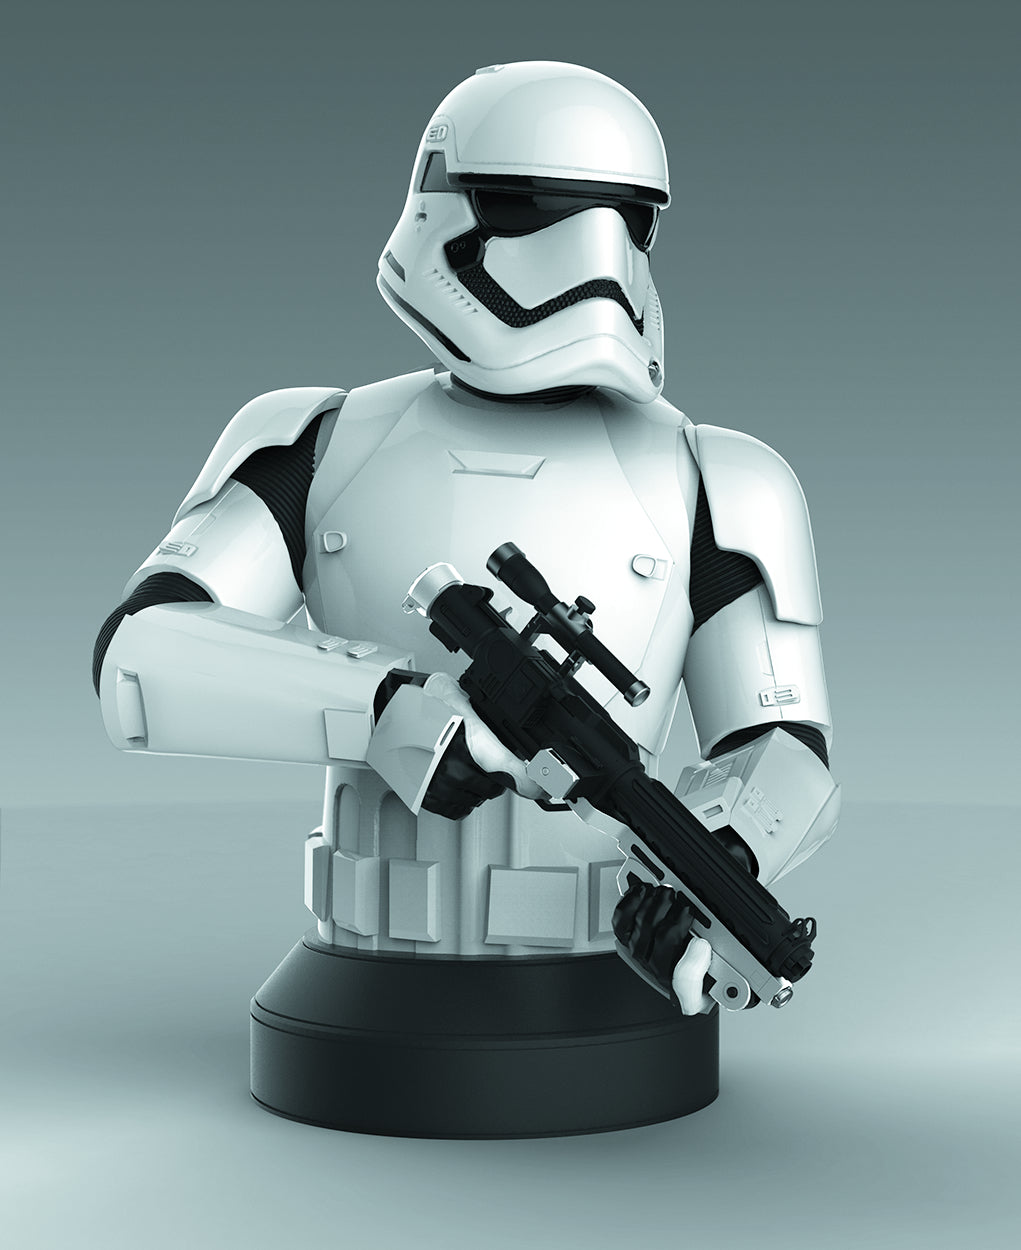 Star Wars E7 First Order Stormtrooper Deluxe Mini-Bust